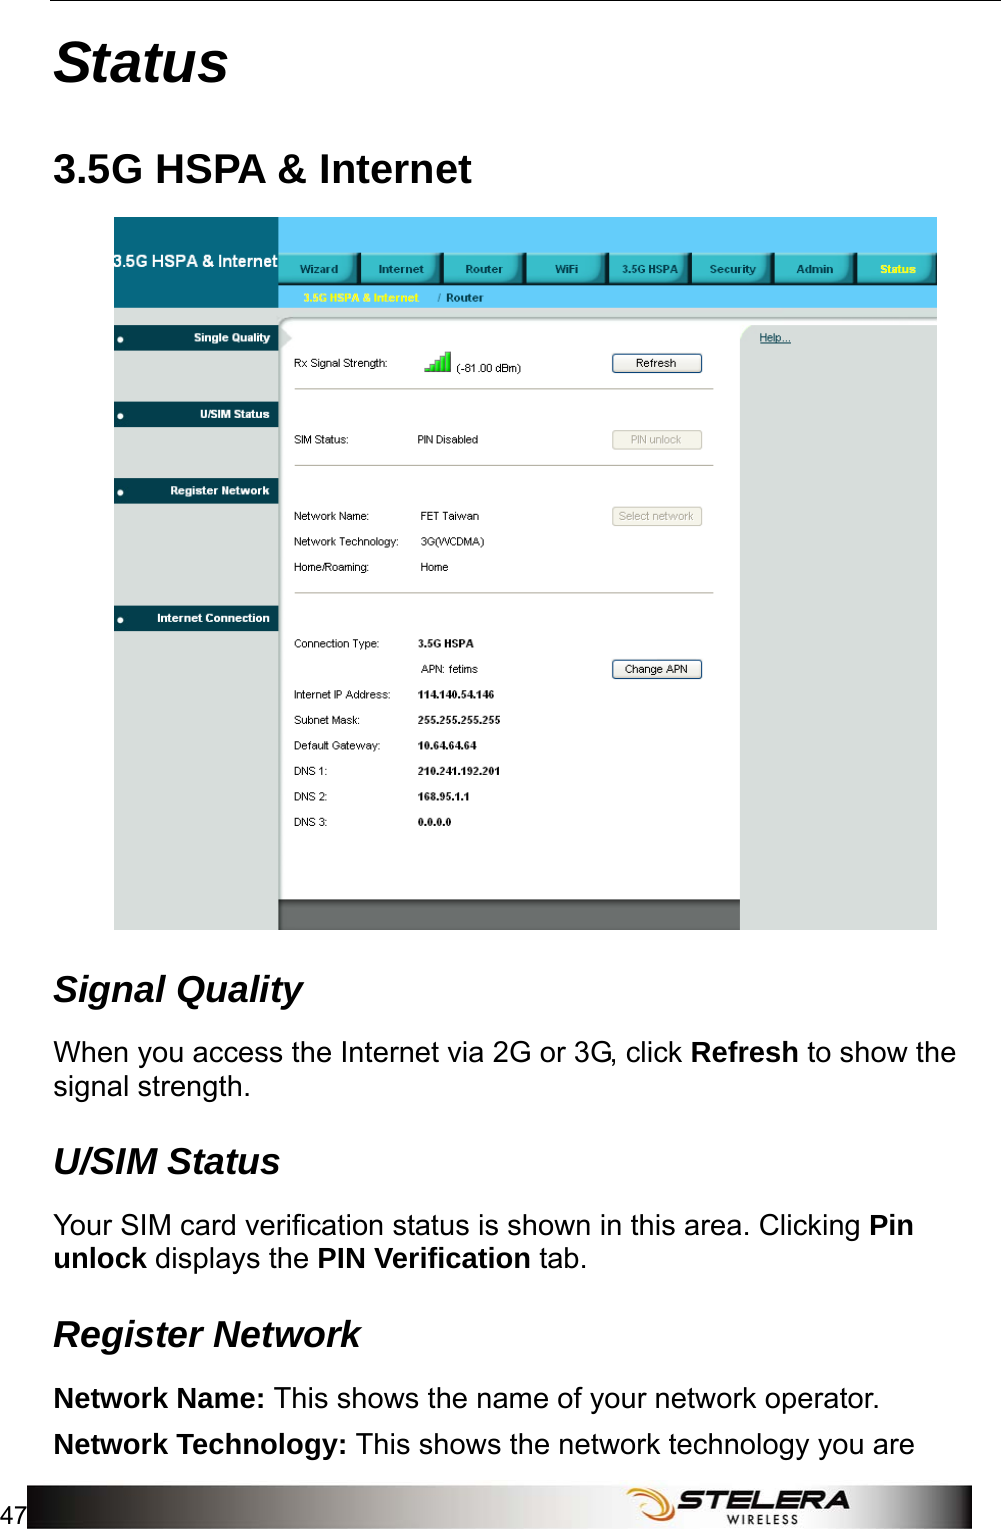  Status 47  Status 3.5G HSPA &amp; Internet  Signal Quality When you access the Internet via 2G or 3G, click Refresh to show the signal strength. U/SIM Status Your SIM card verification status is shown in this area. Clicking Pin unlock displays the PIN Verification tab. Register Network Network Name: This shows the name of your network operator. Network Technology: This shows the network technology you are 